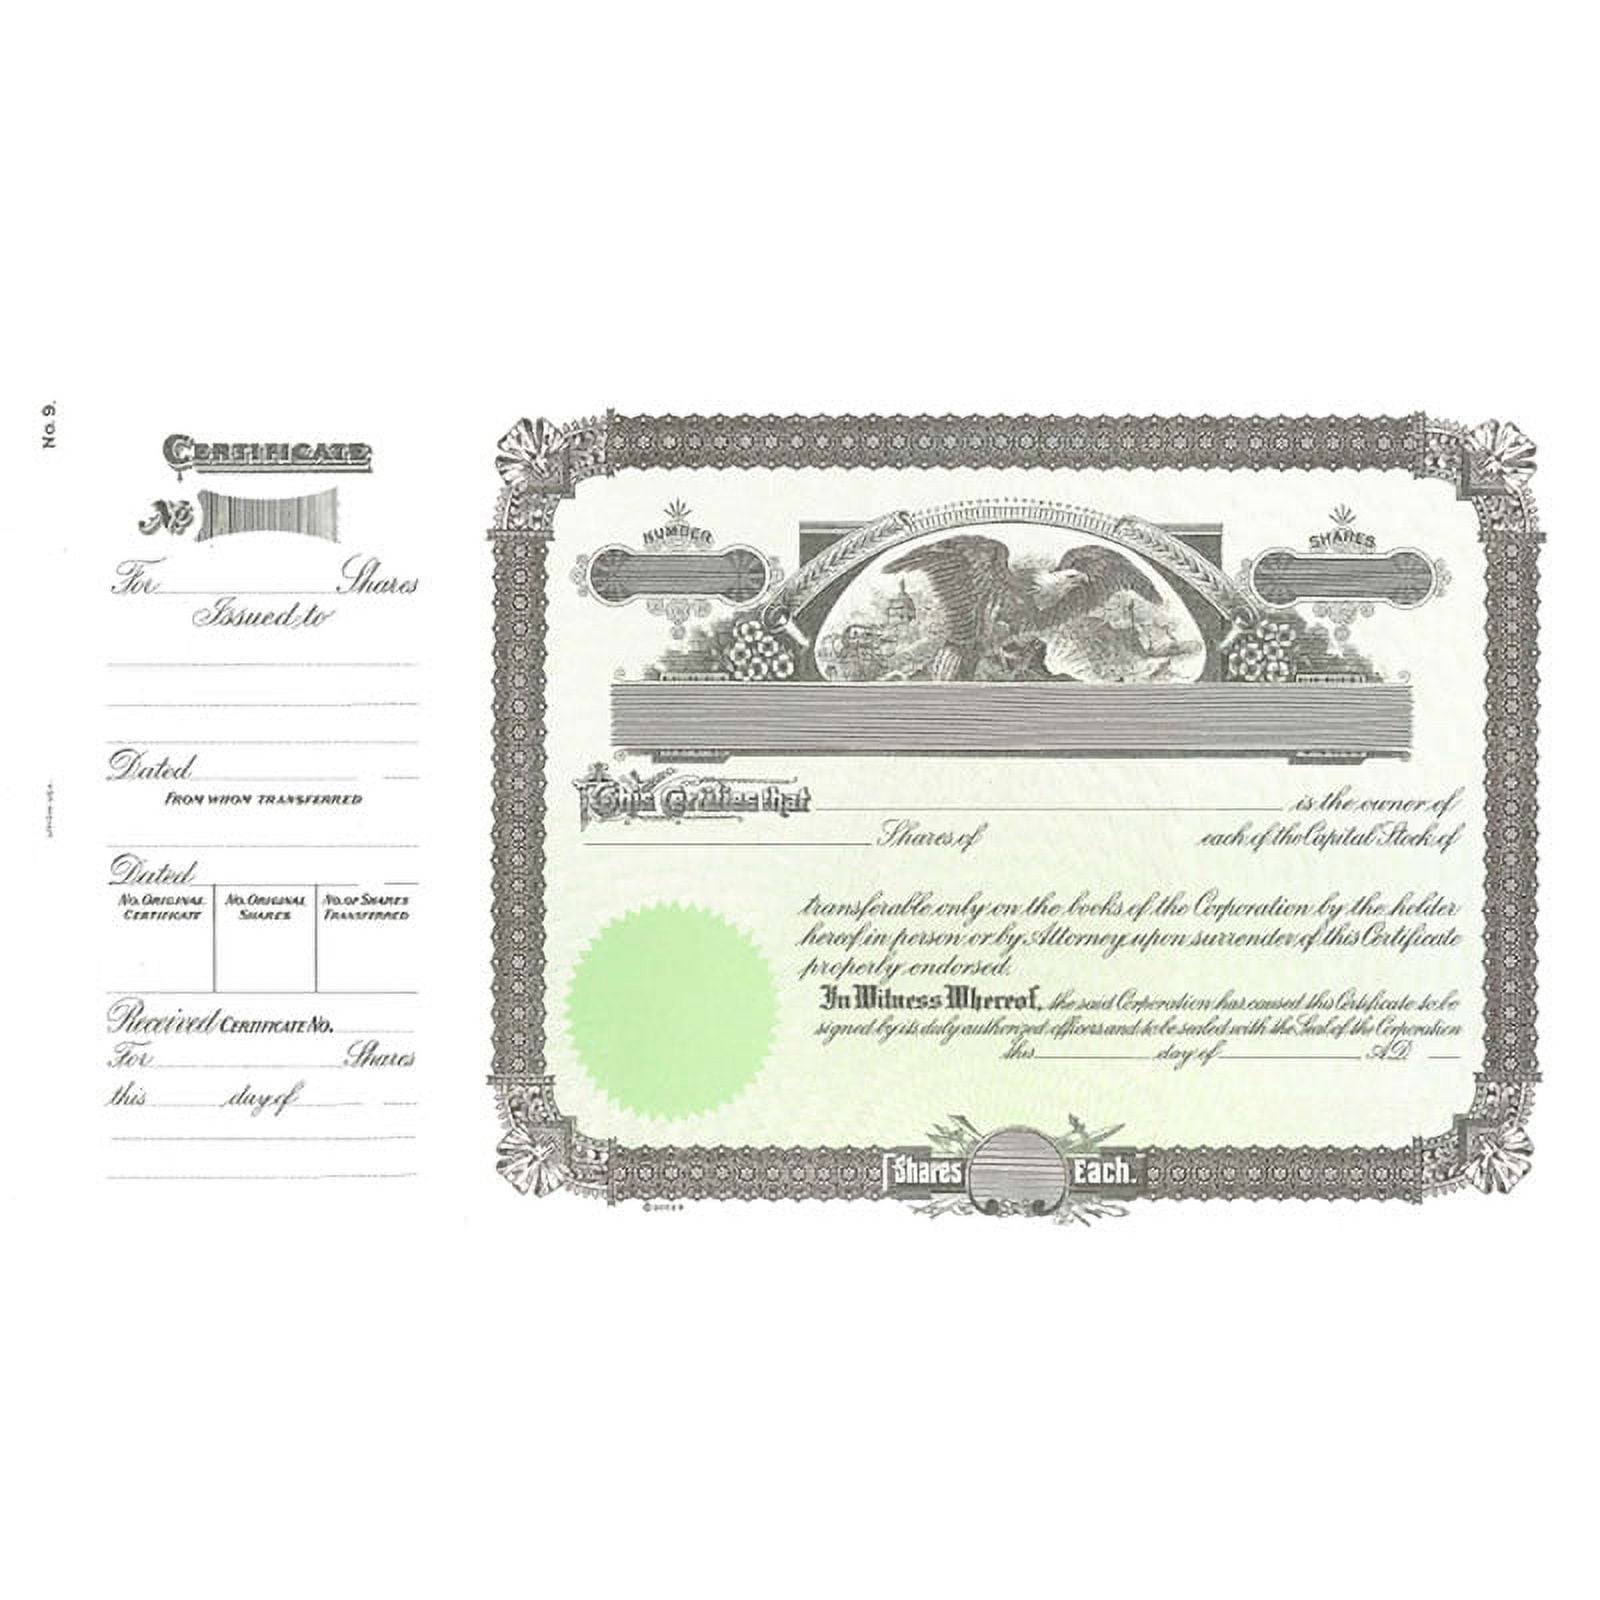 50 Sheets Silver Foil Certificate Paper for Printing - Customizable Blank  Cardstock with Border for Graduation Diploma, Achievement Awards,  Recognition Documents (8.5 x 11 in, White) 